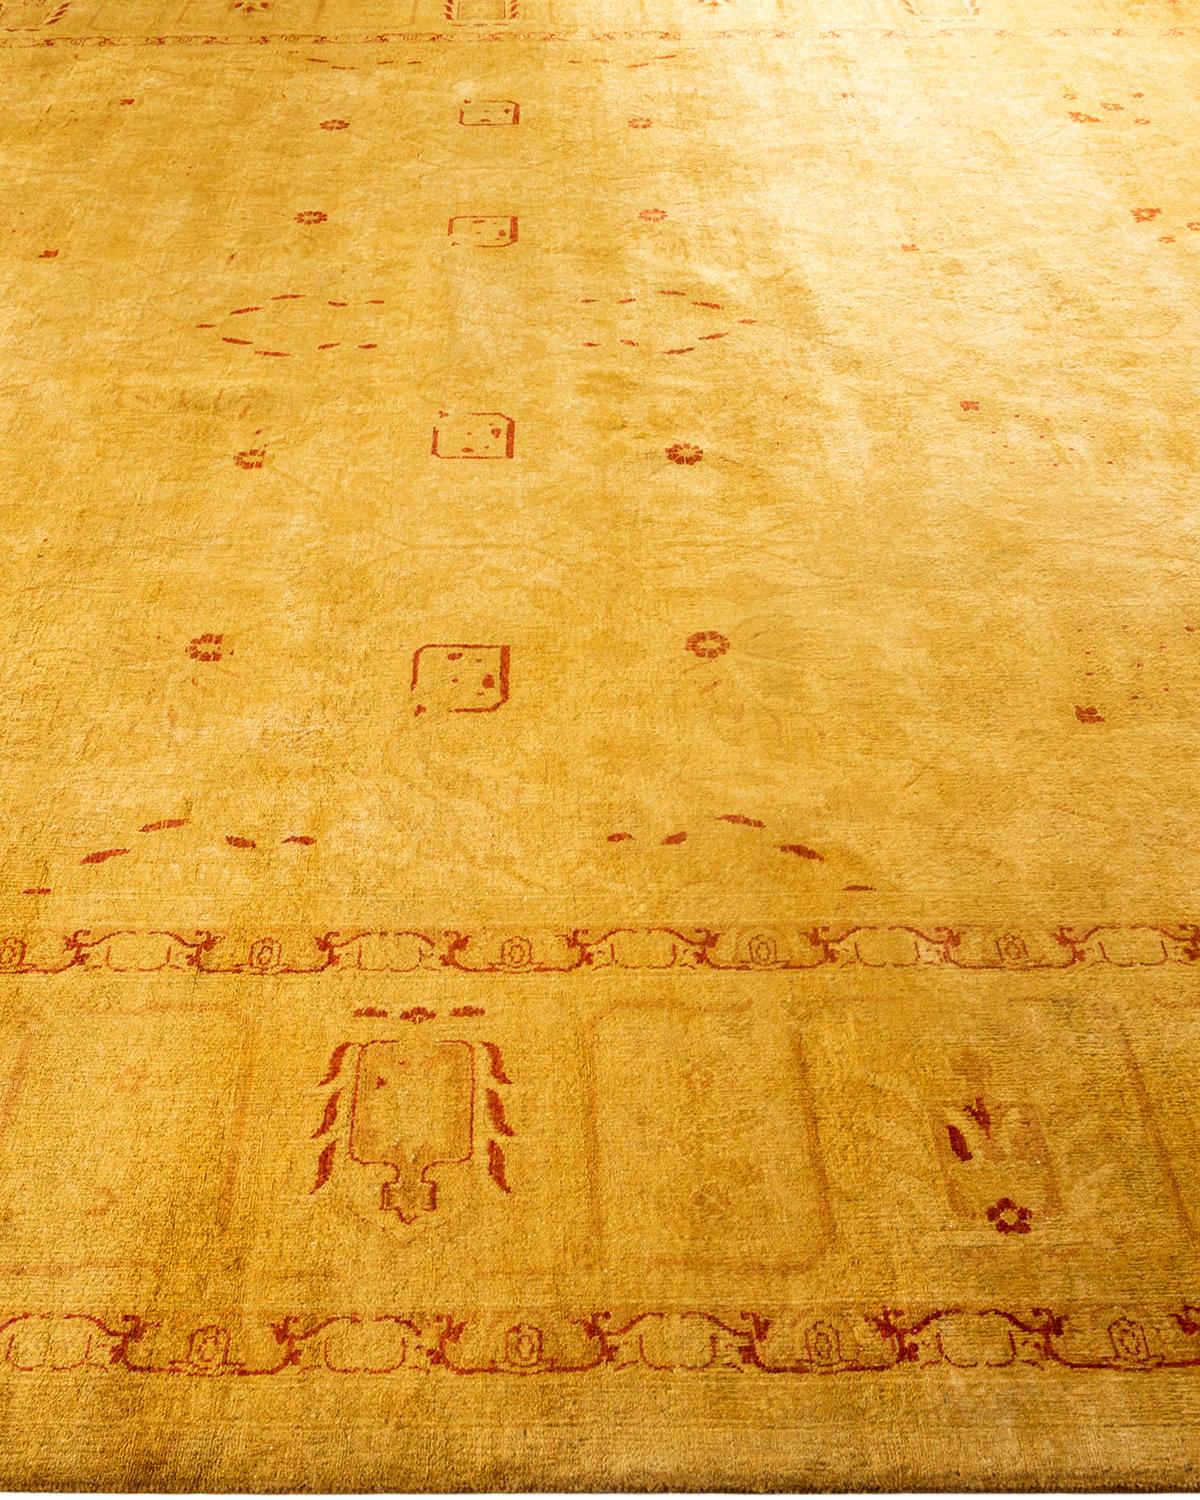 Contemporary Overdyed Hand Knotted Wool Yellow Area Rug In New Condition For Sale In Norwalk, CT